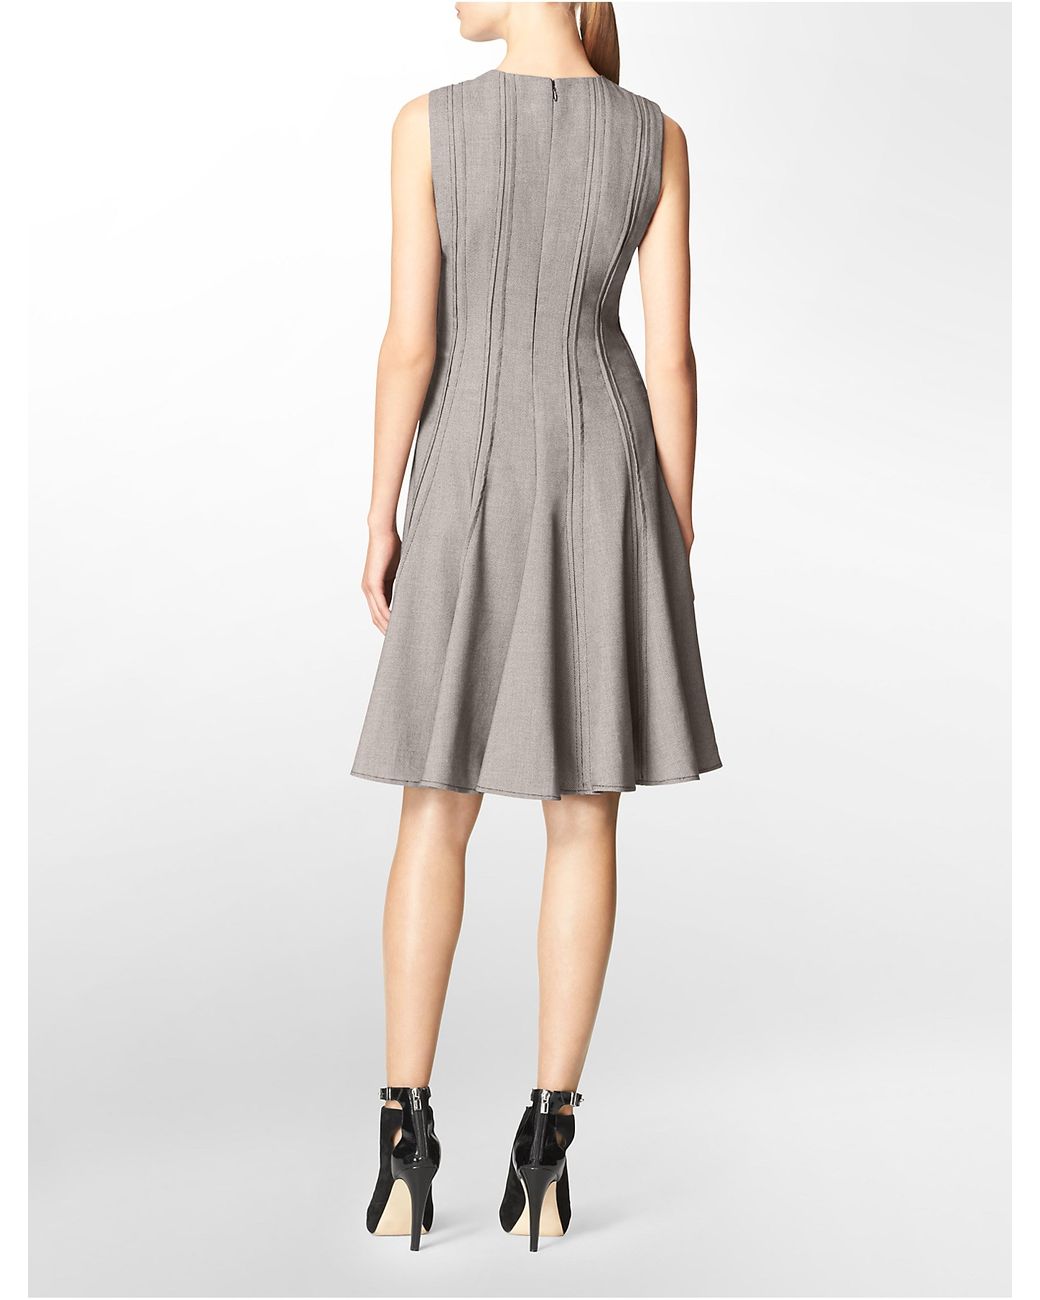 Calvin Klein White Label Pattern Seamed Sleeveless Fit + Flare Dress in  Charcoal (Gray) | Lyst